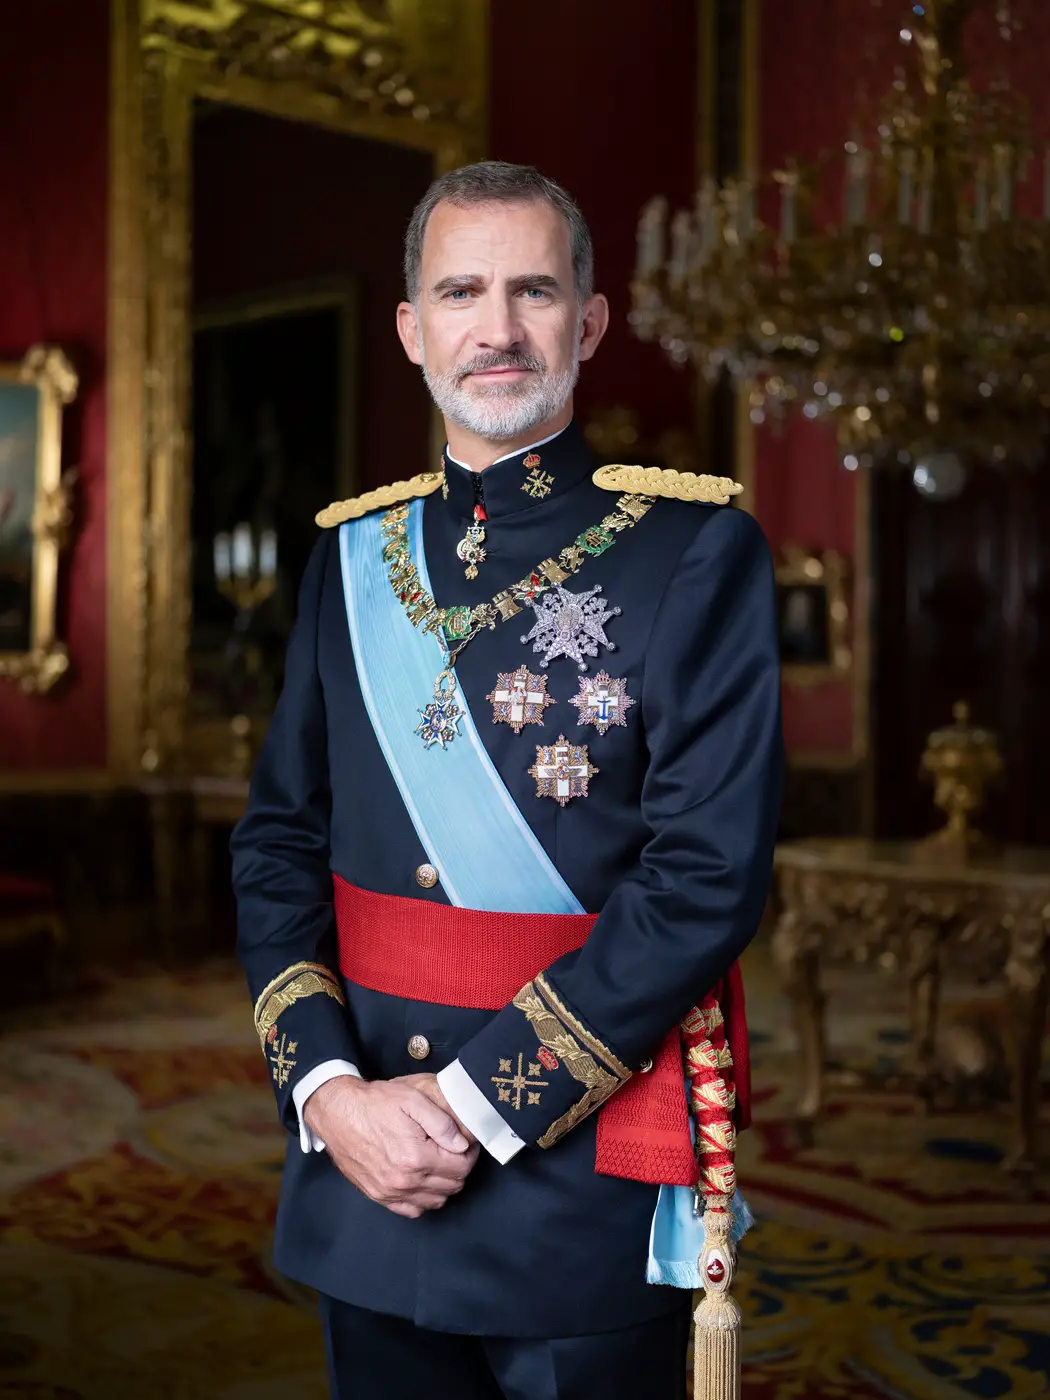 CasaReal released official portraits of King Felipe and his family